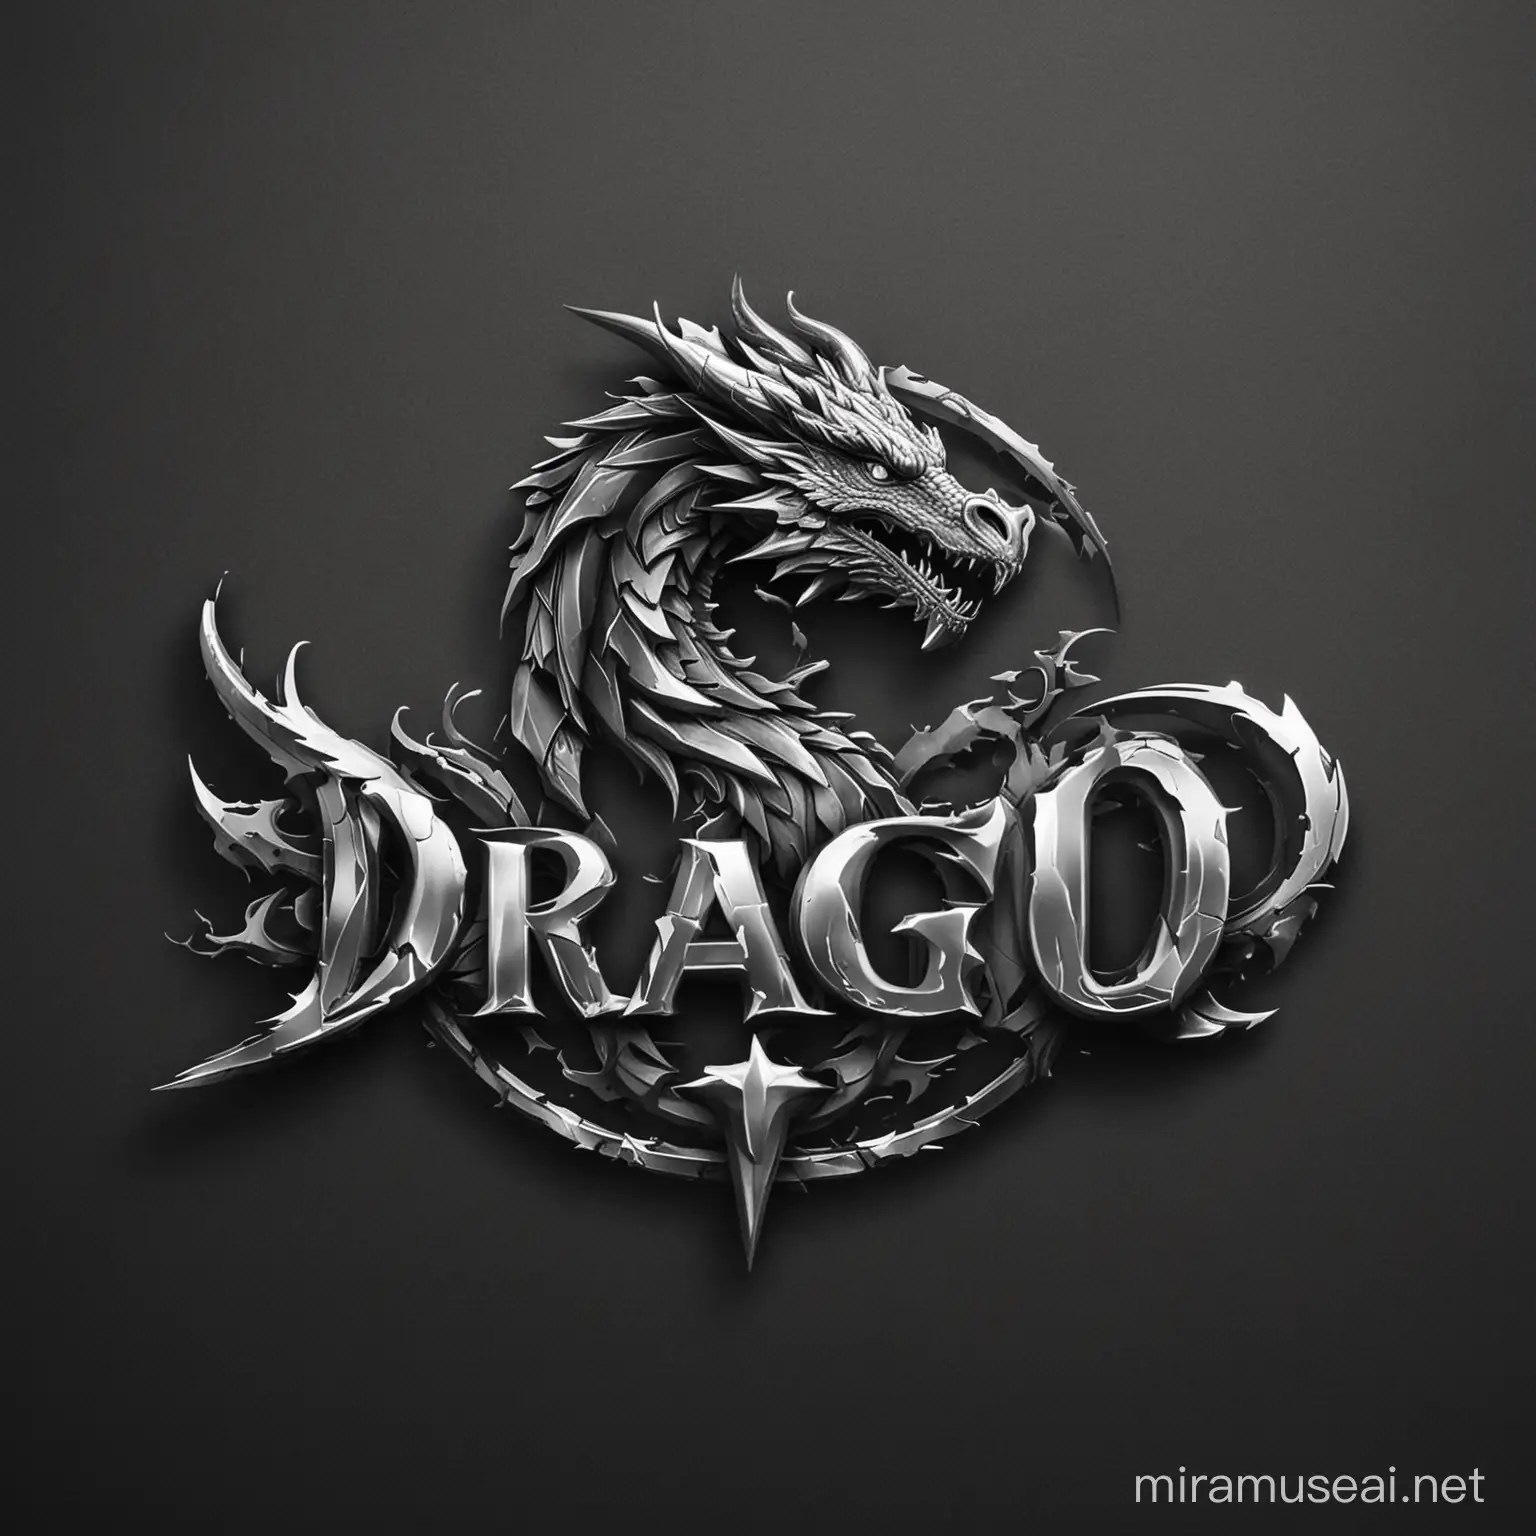 my name is DRAGO create logo for me my logo name "DRAGO" and use Dragon for the logo 
